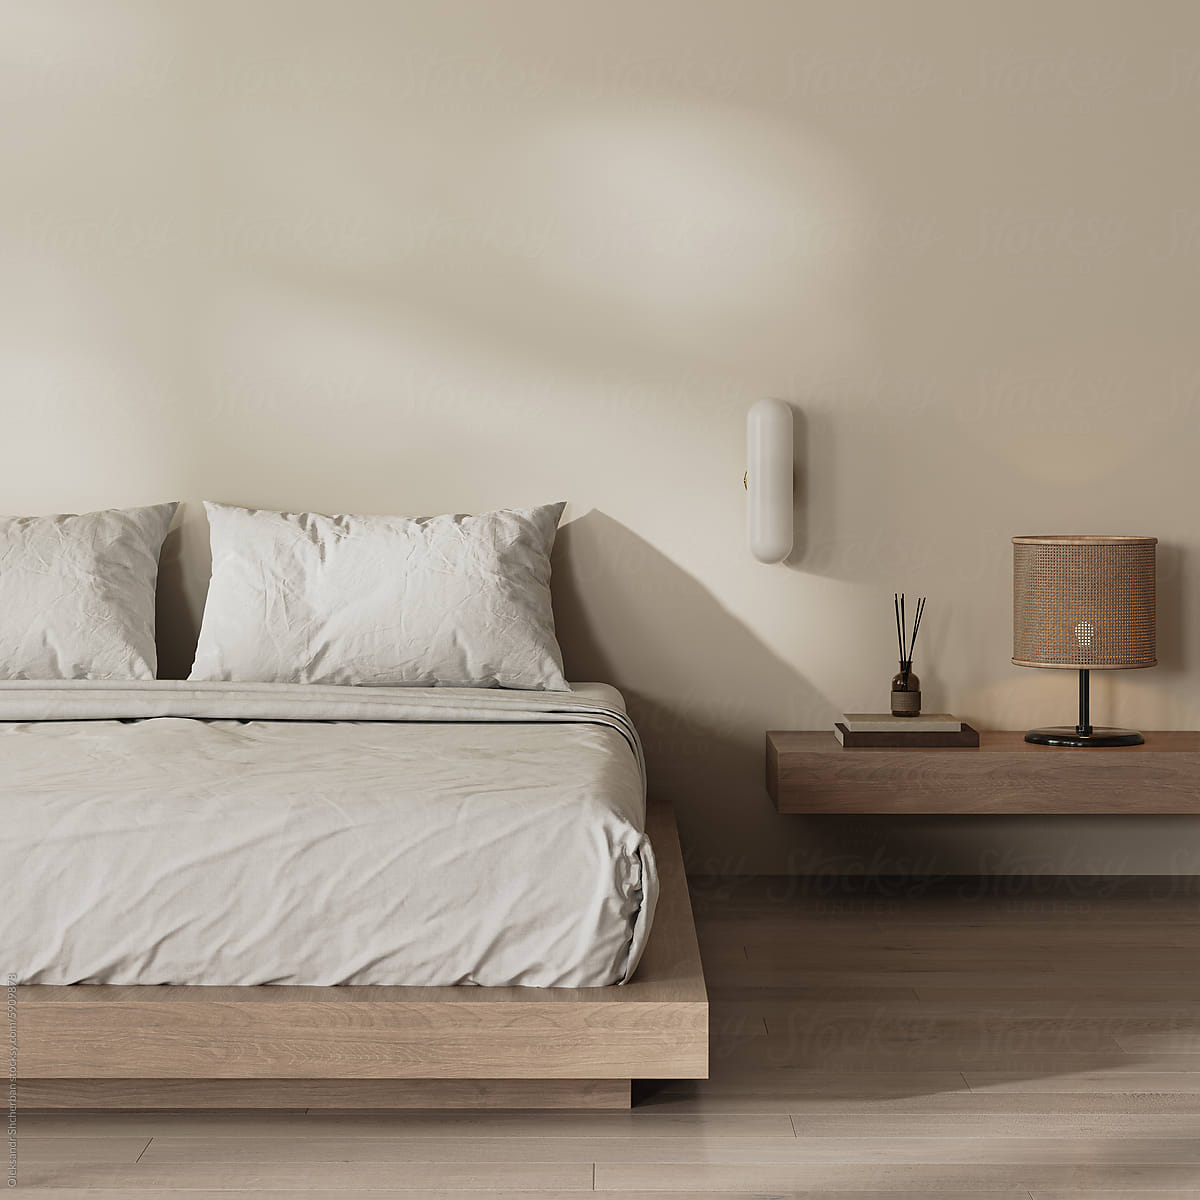 Bedroom interior with bed and wooden furniture, 3d render